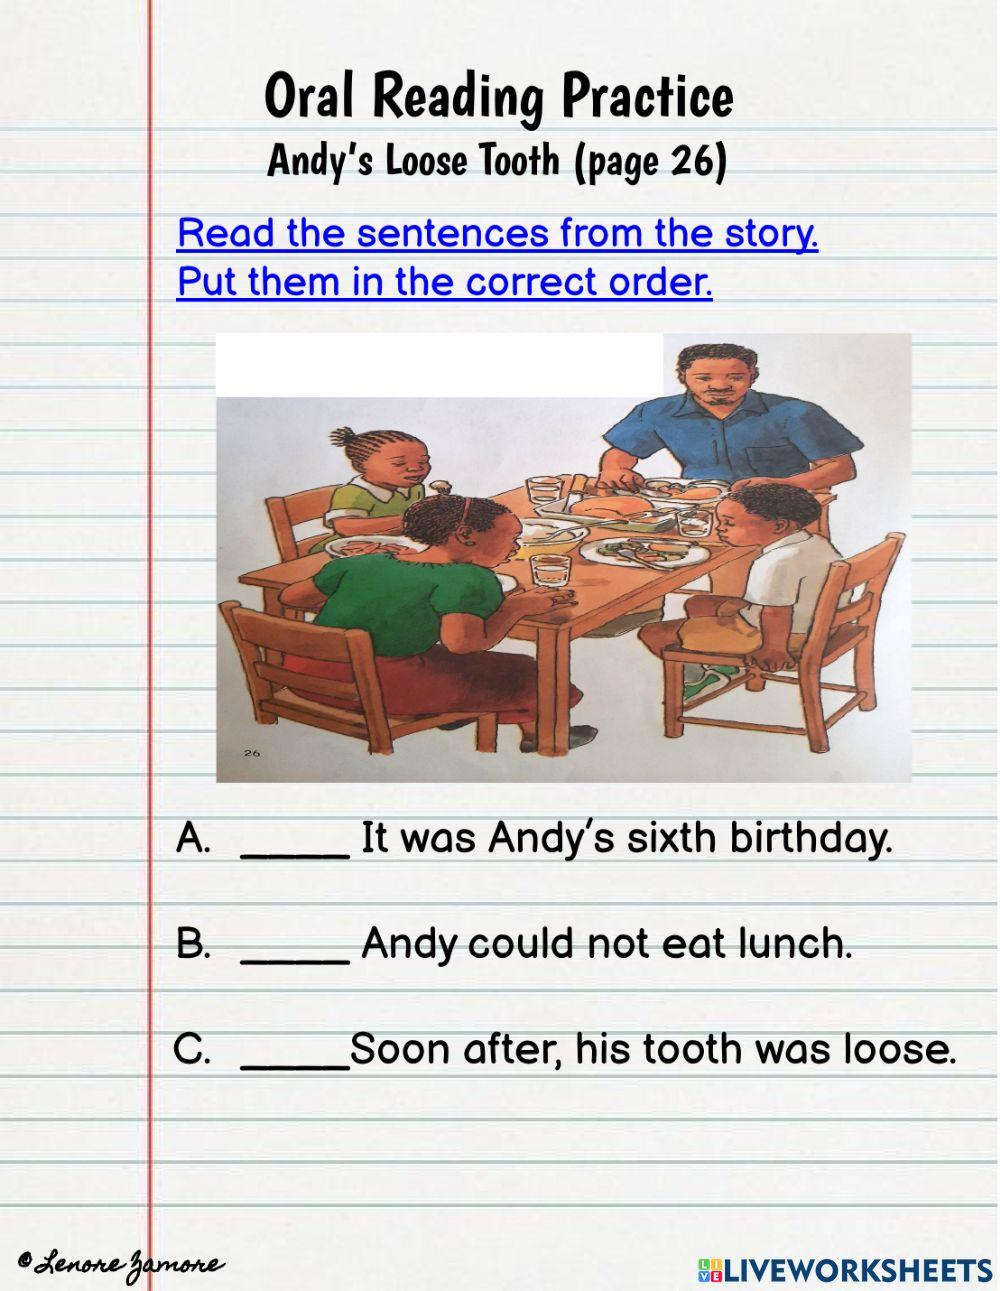 Oral Reading Practice